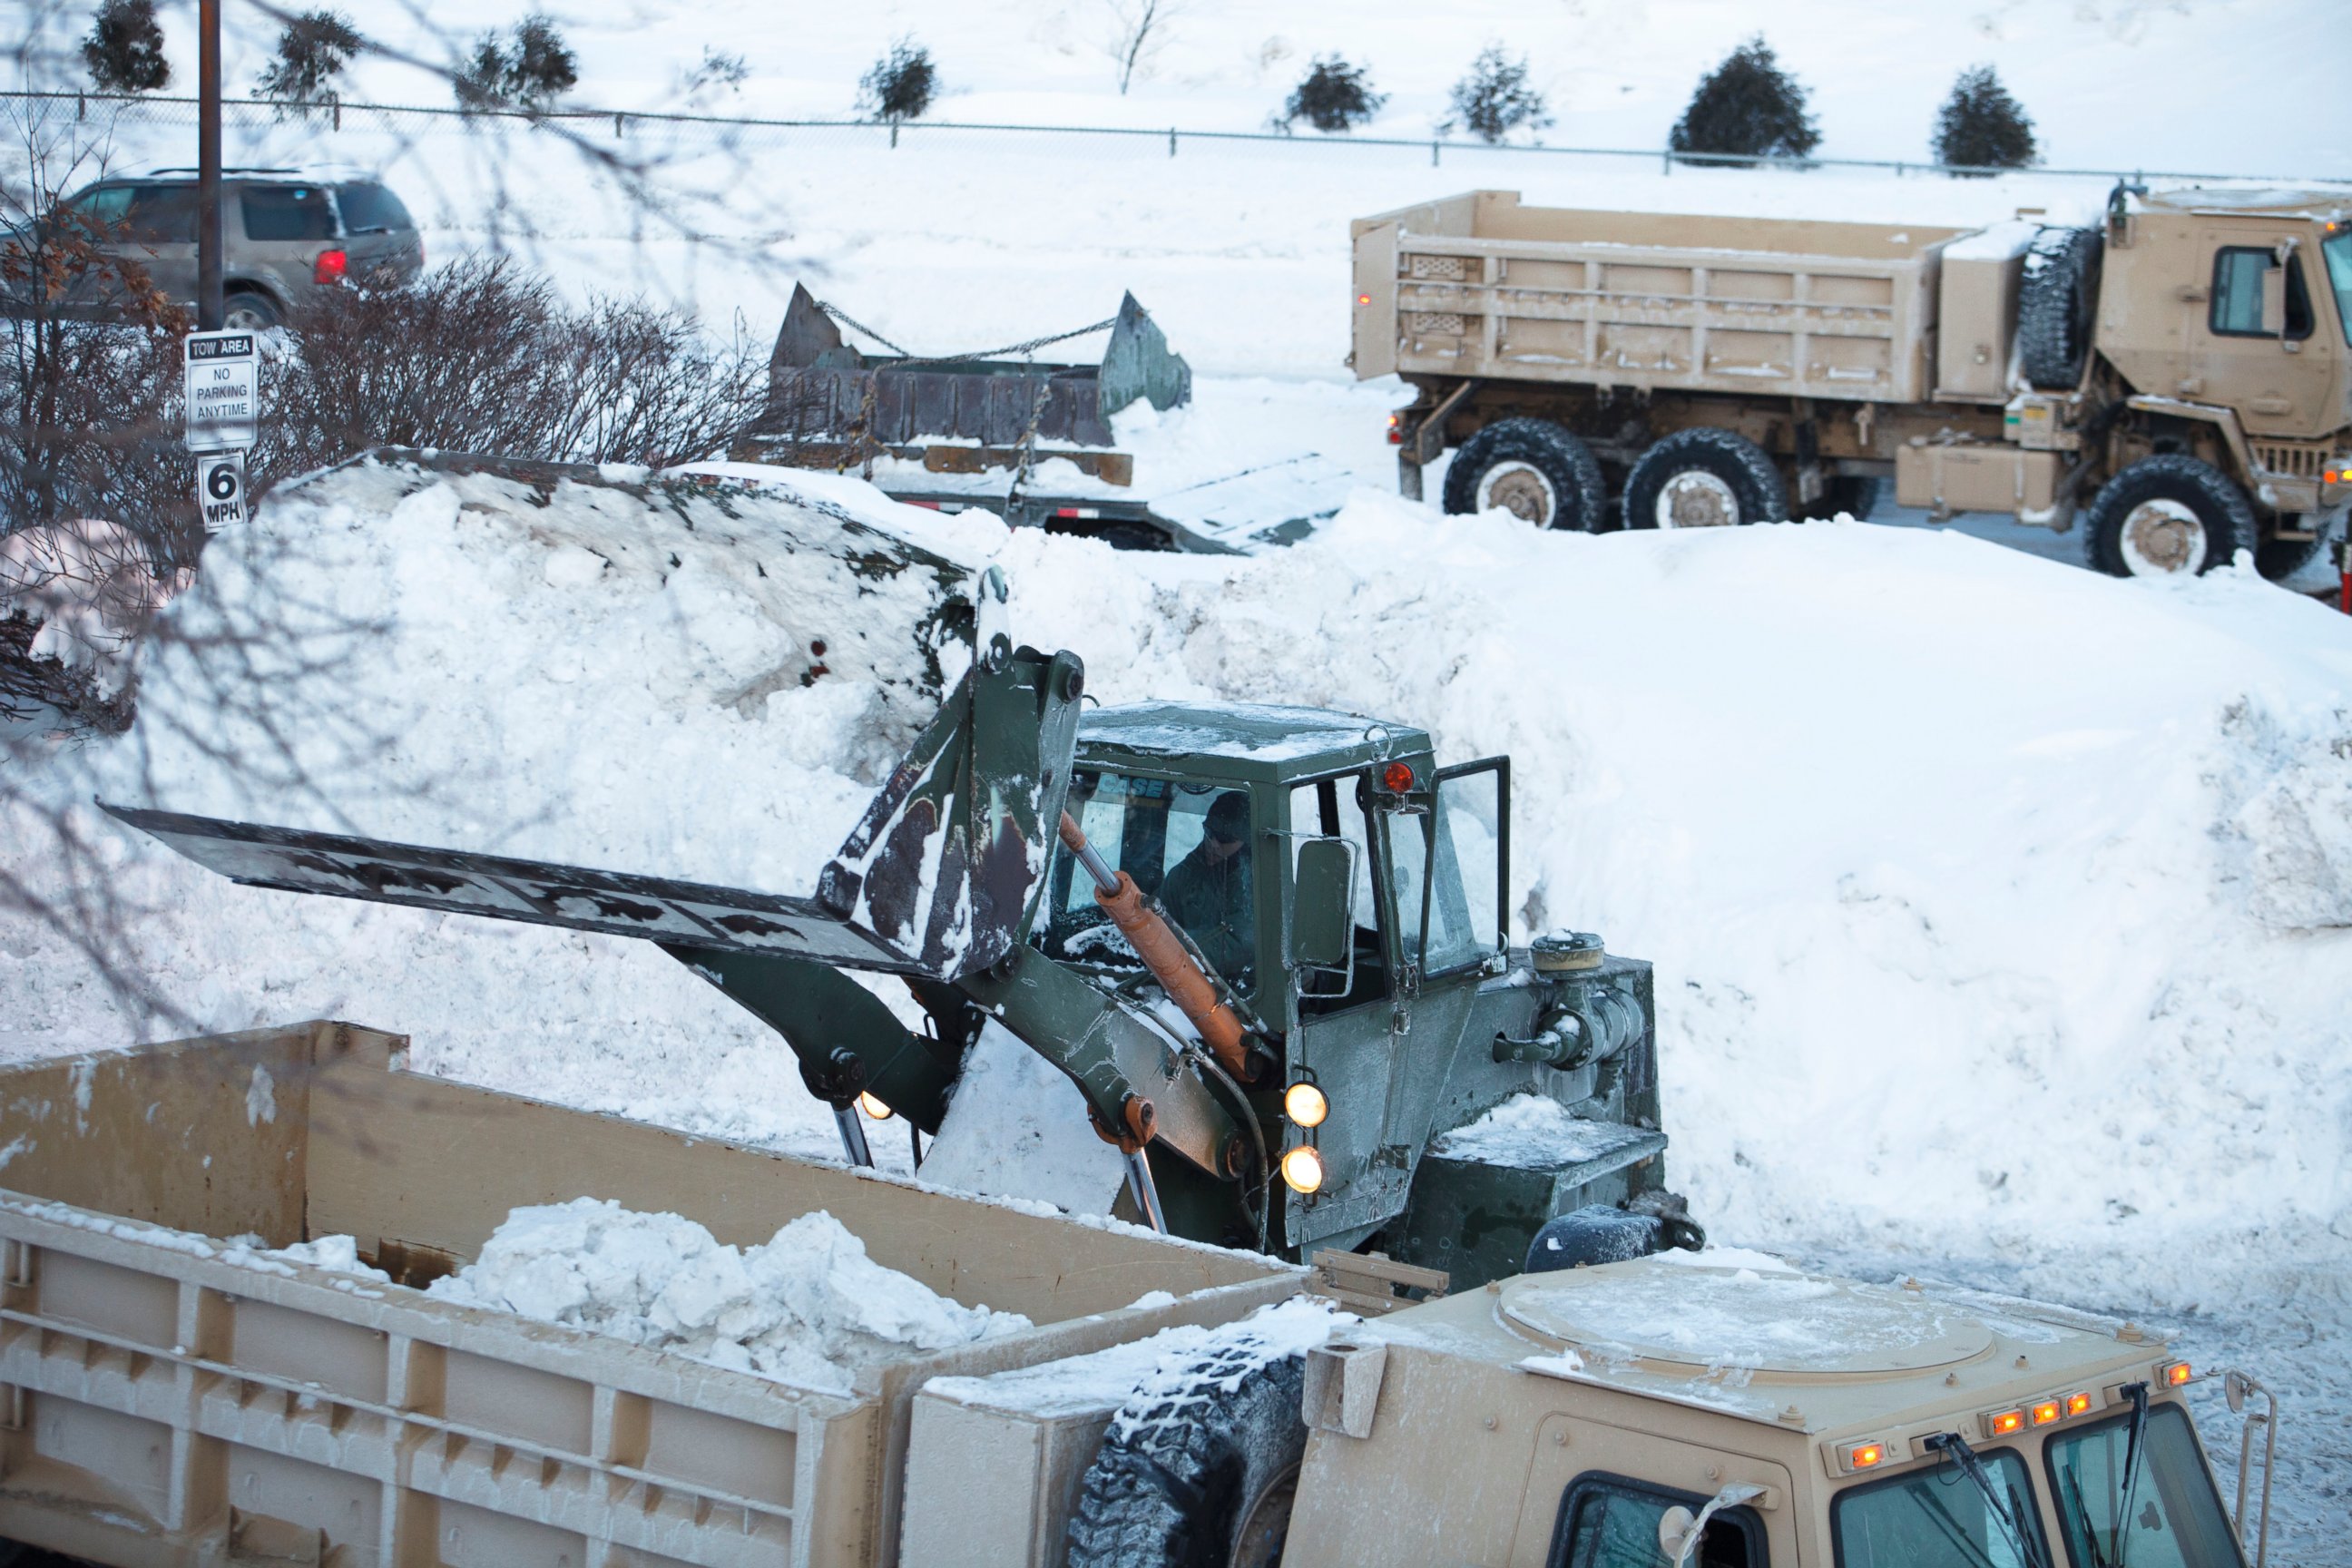 PHOTO: Four units from the Maine National Guard worked with heavy equipment to remove snow from the Braintree MBTA T station on Ivory Street, Feb. 15, 2015.